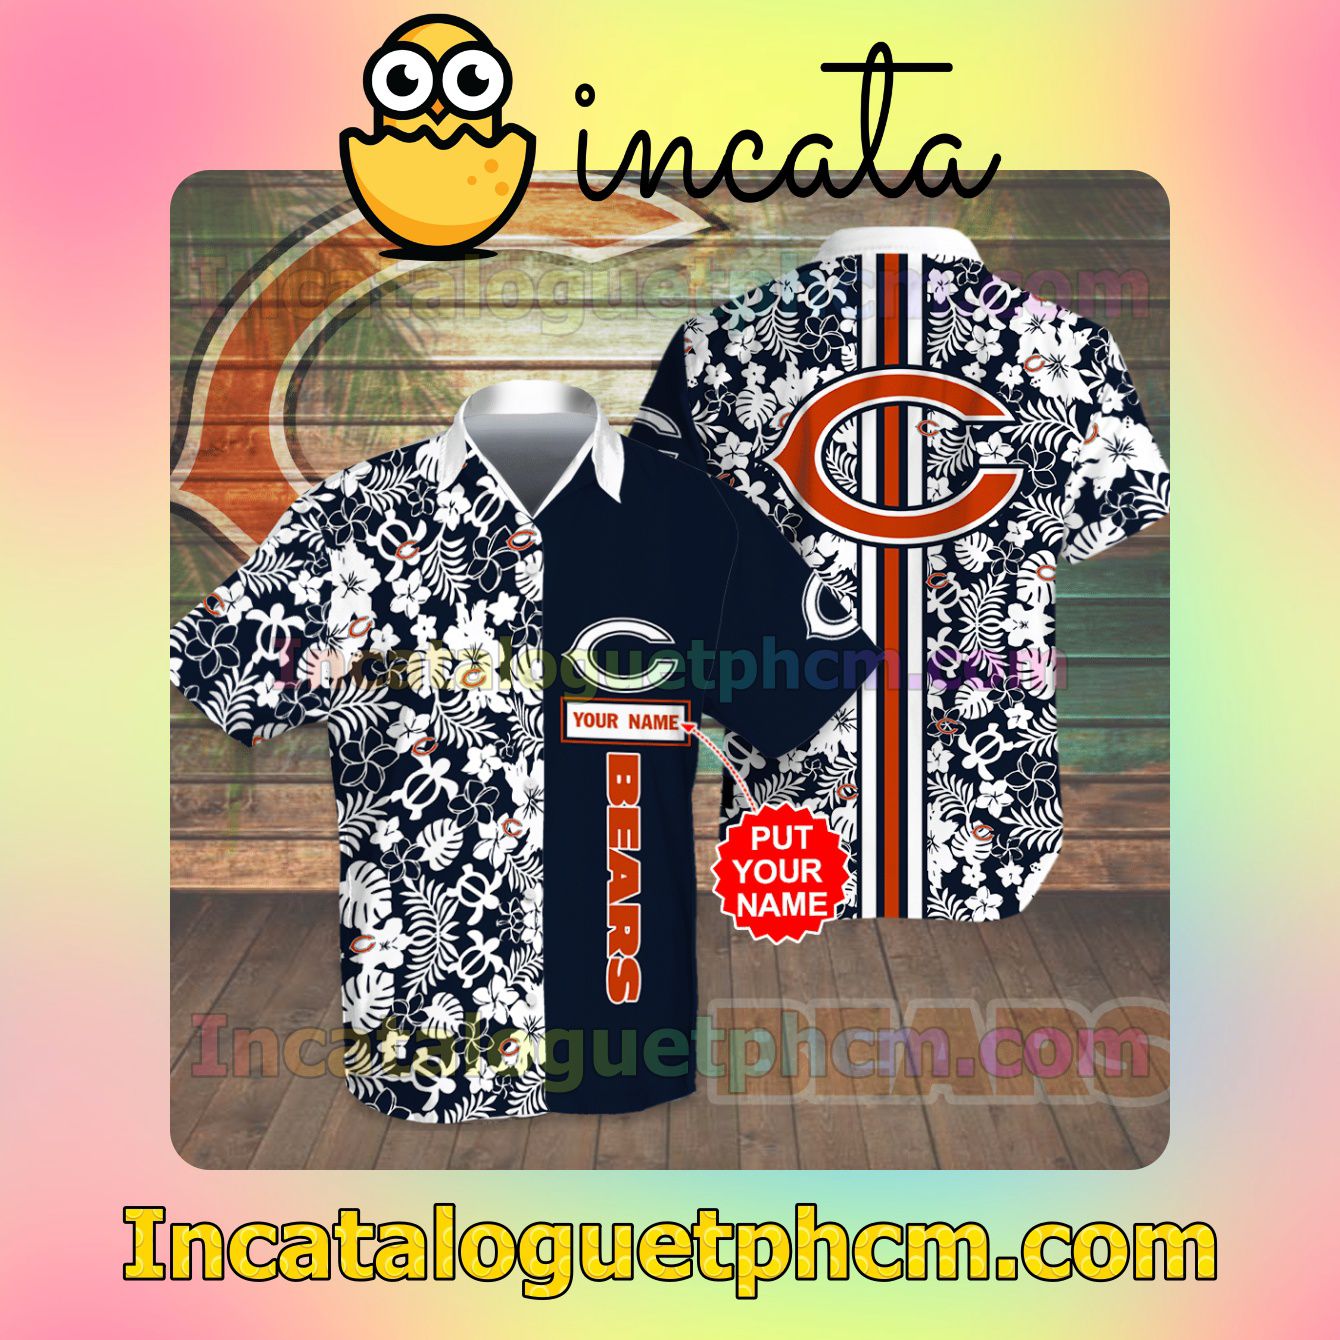 Personalized Chicago Bears Flowery Black Button Shirt And Swim Trunk